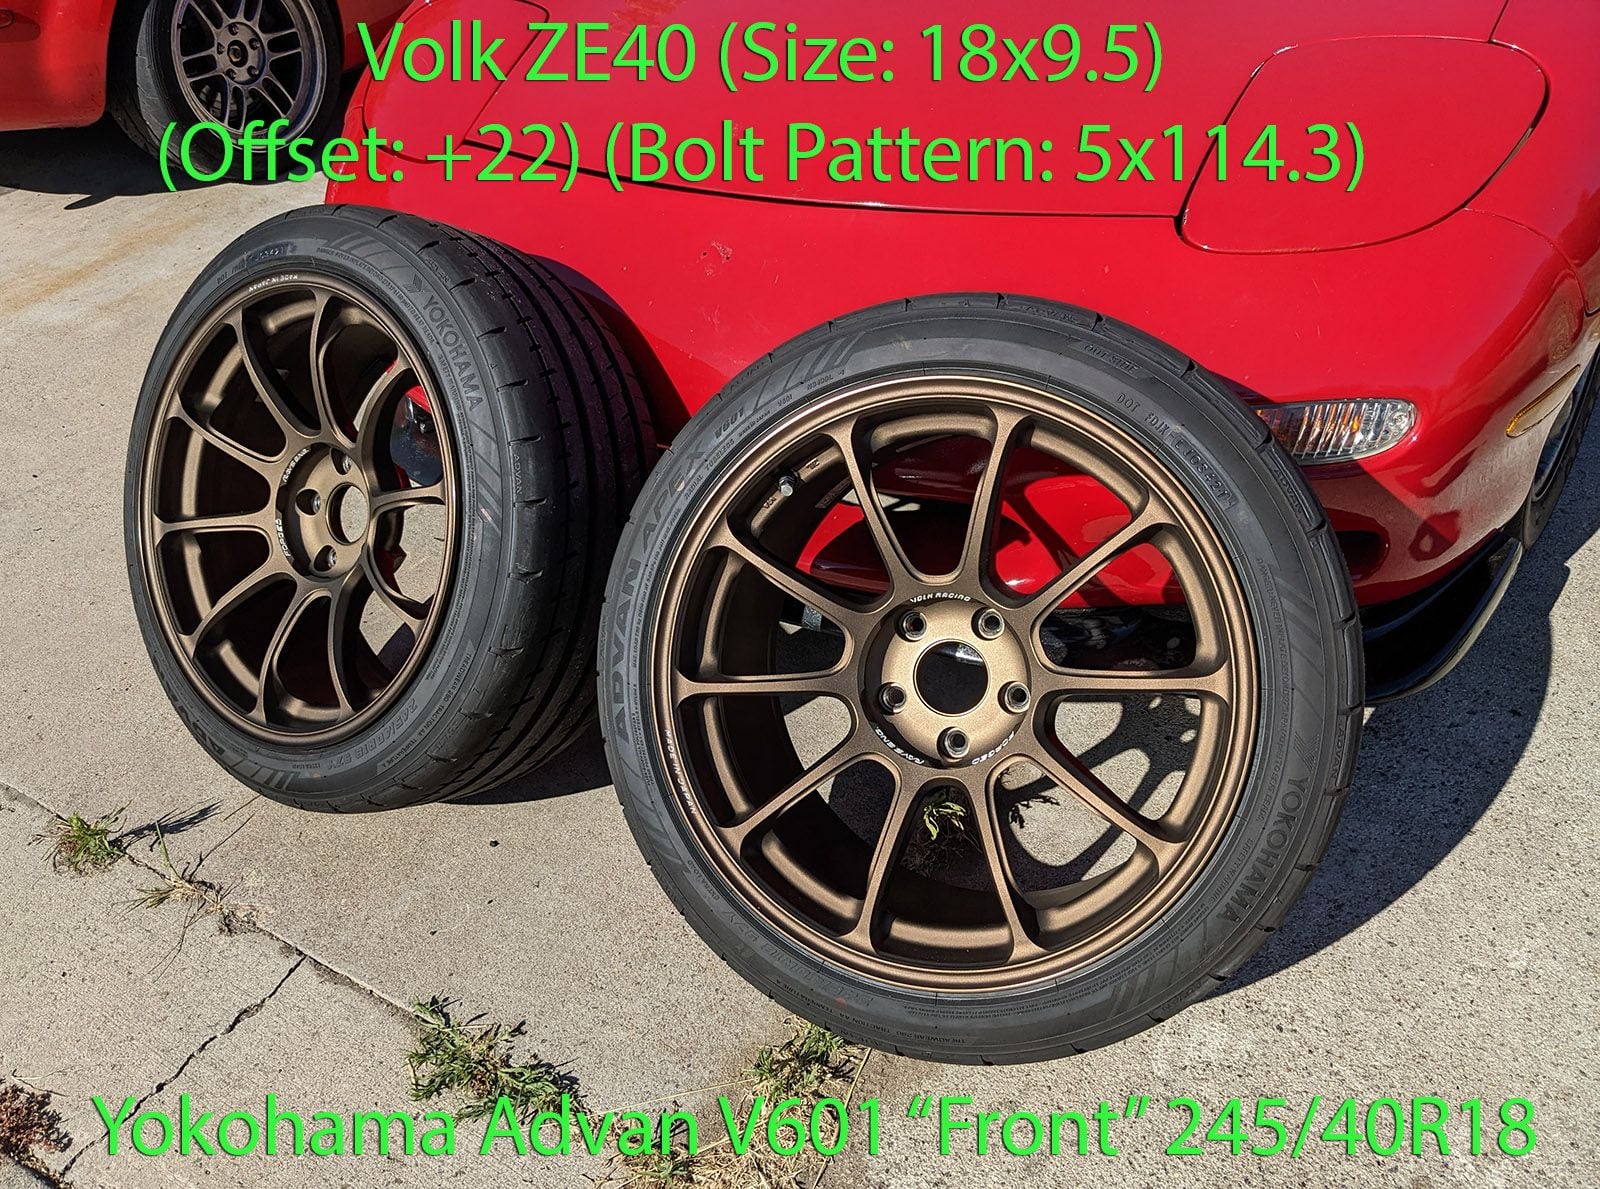 Wheels and Tires/Axles - Volk ZE40 18x9.5 +22 5x114.3 Bronze Rims and Tires - Used - All Years Any Make All Models - San Diego, CA 92111, United States